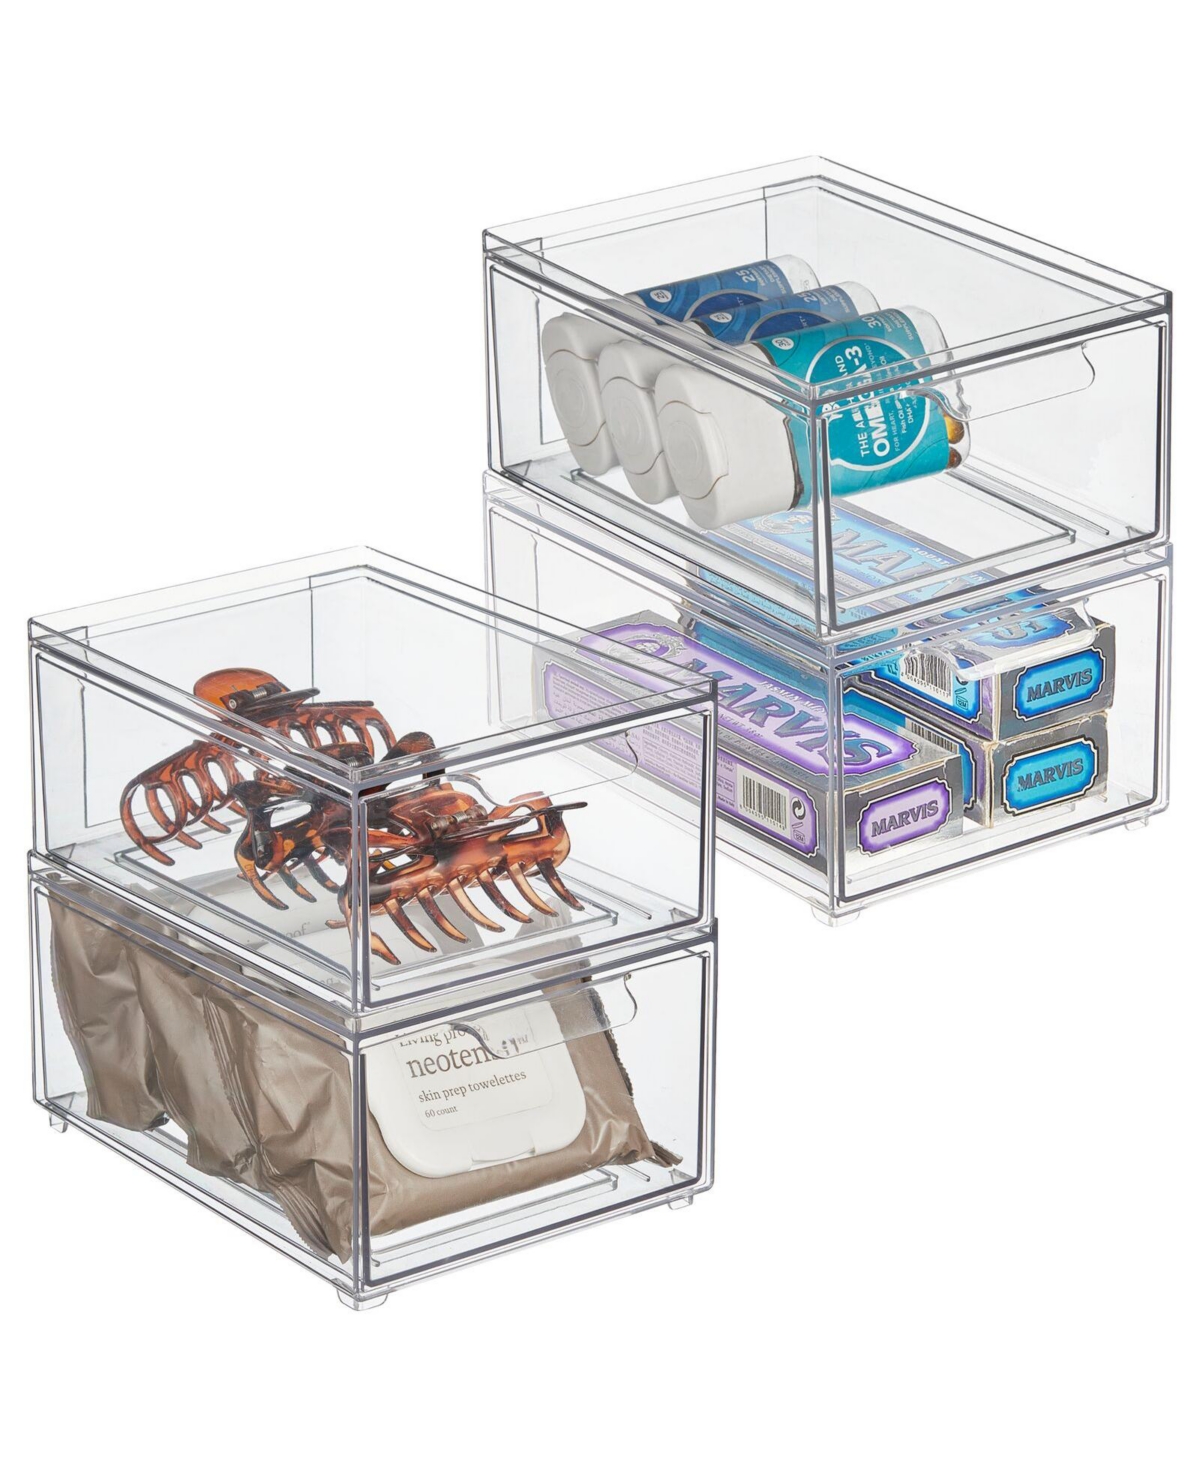 Plastic Stackable Bathroom Vanity Storage Organizer with Drawer - 8 x 6 x 4 - 4 Pack - Clear